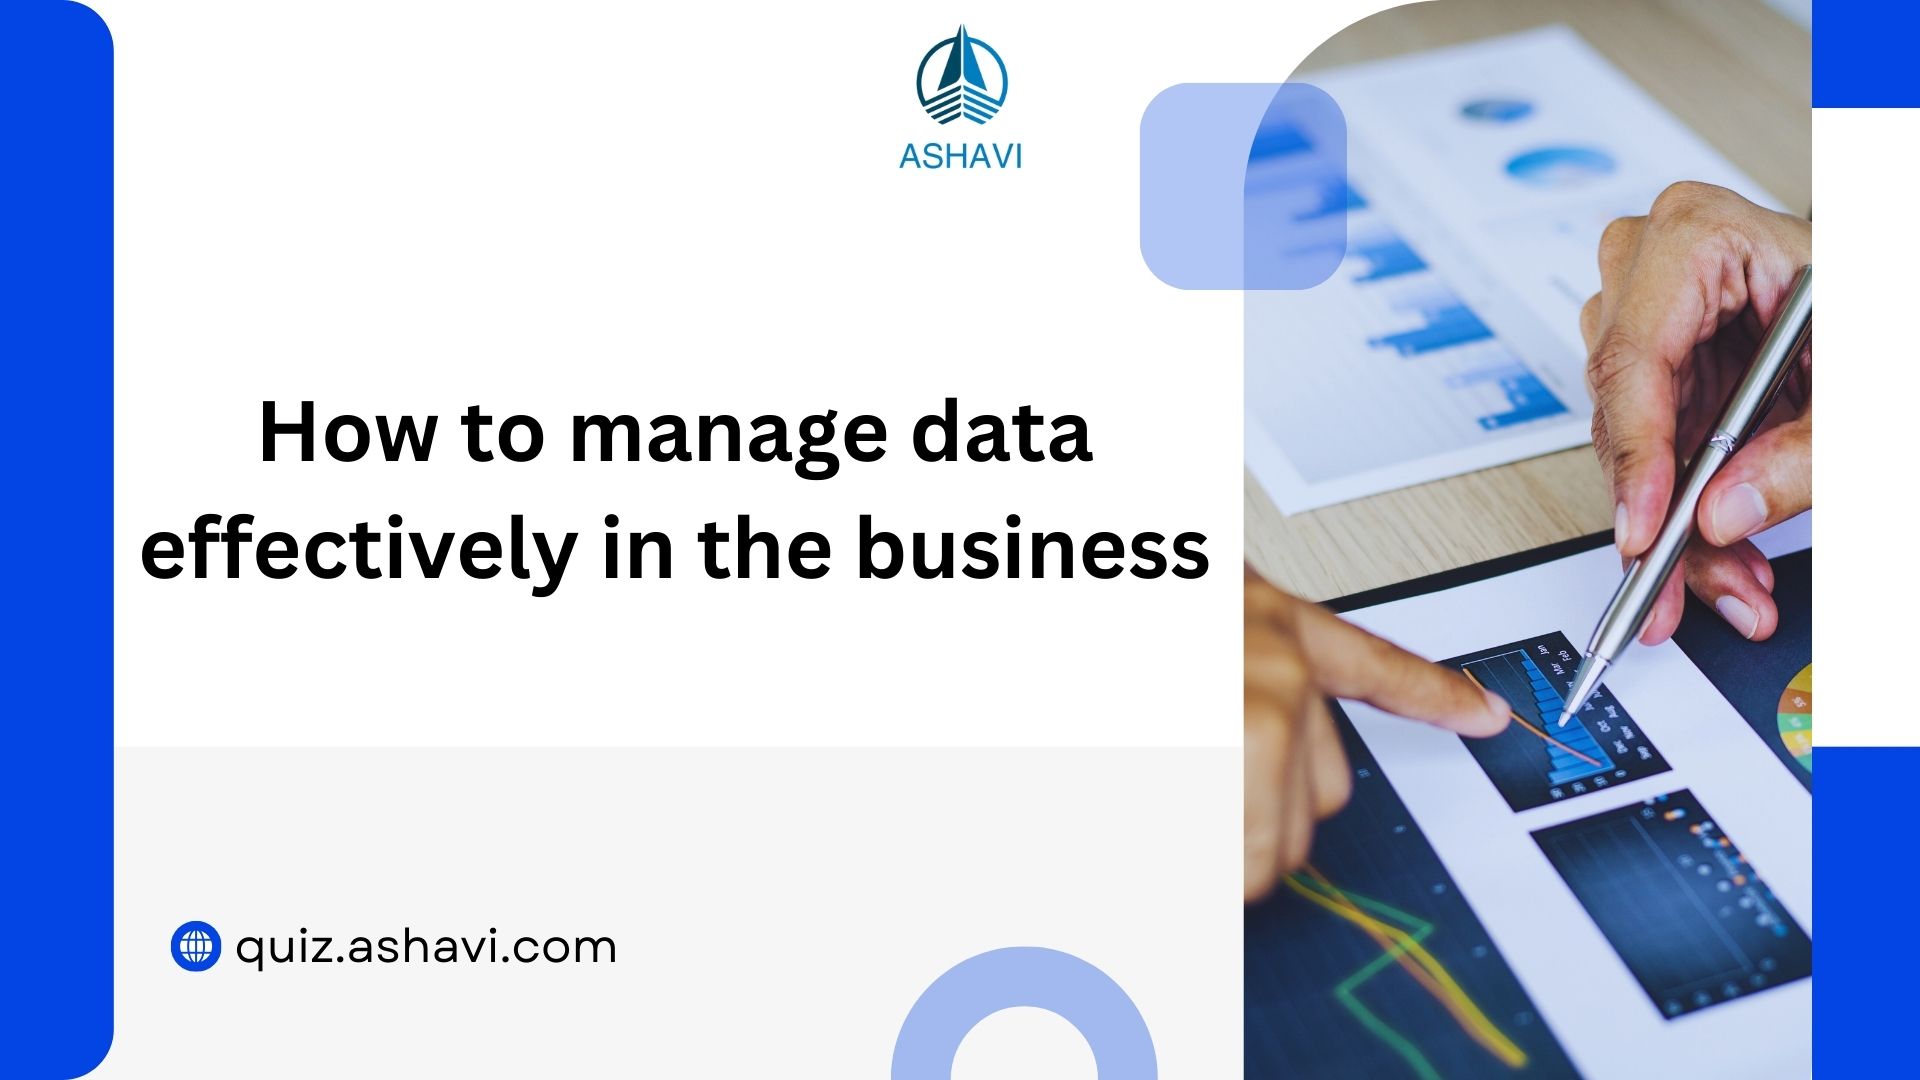 How to manage data effectively in the business